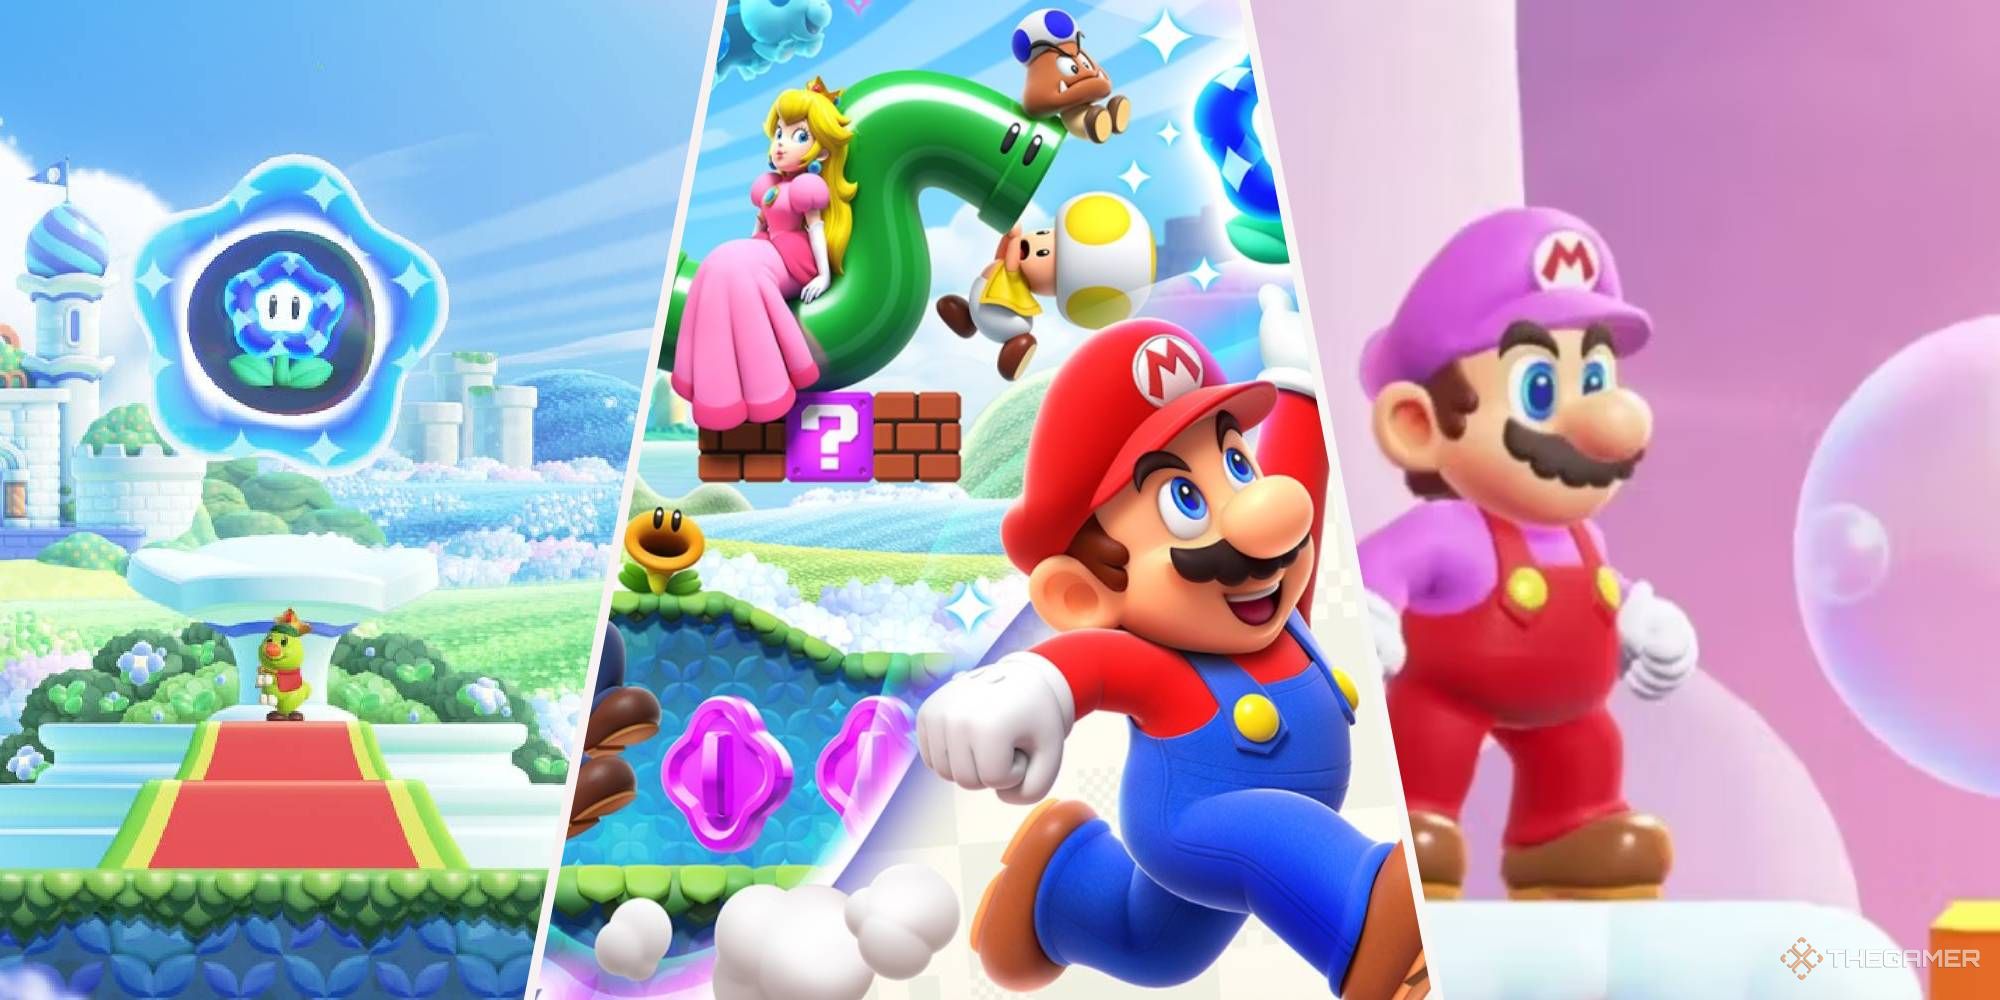 New Gameplay Footage For Super Mario Bros Wonder Shown Off